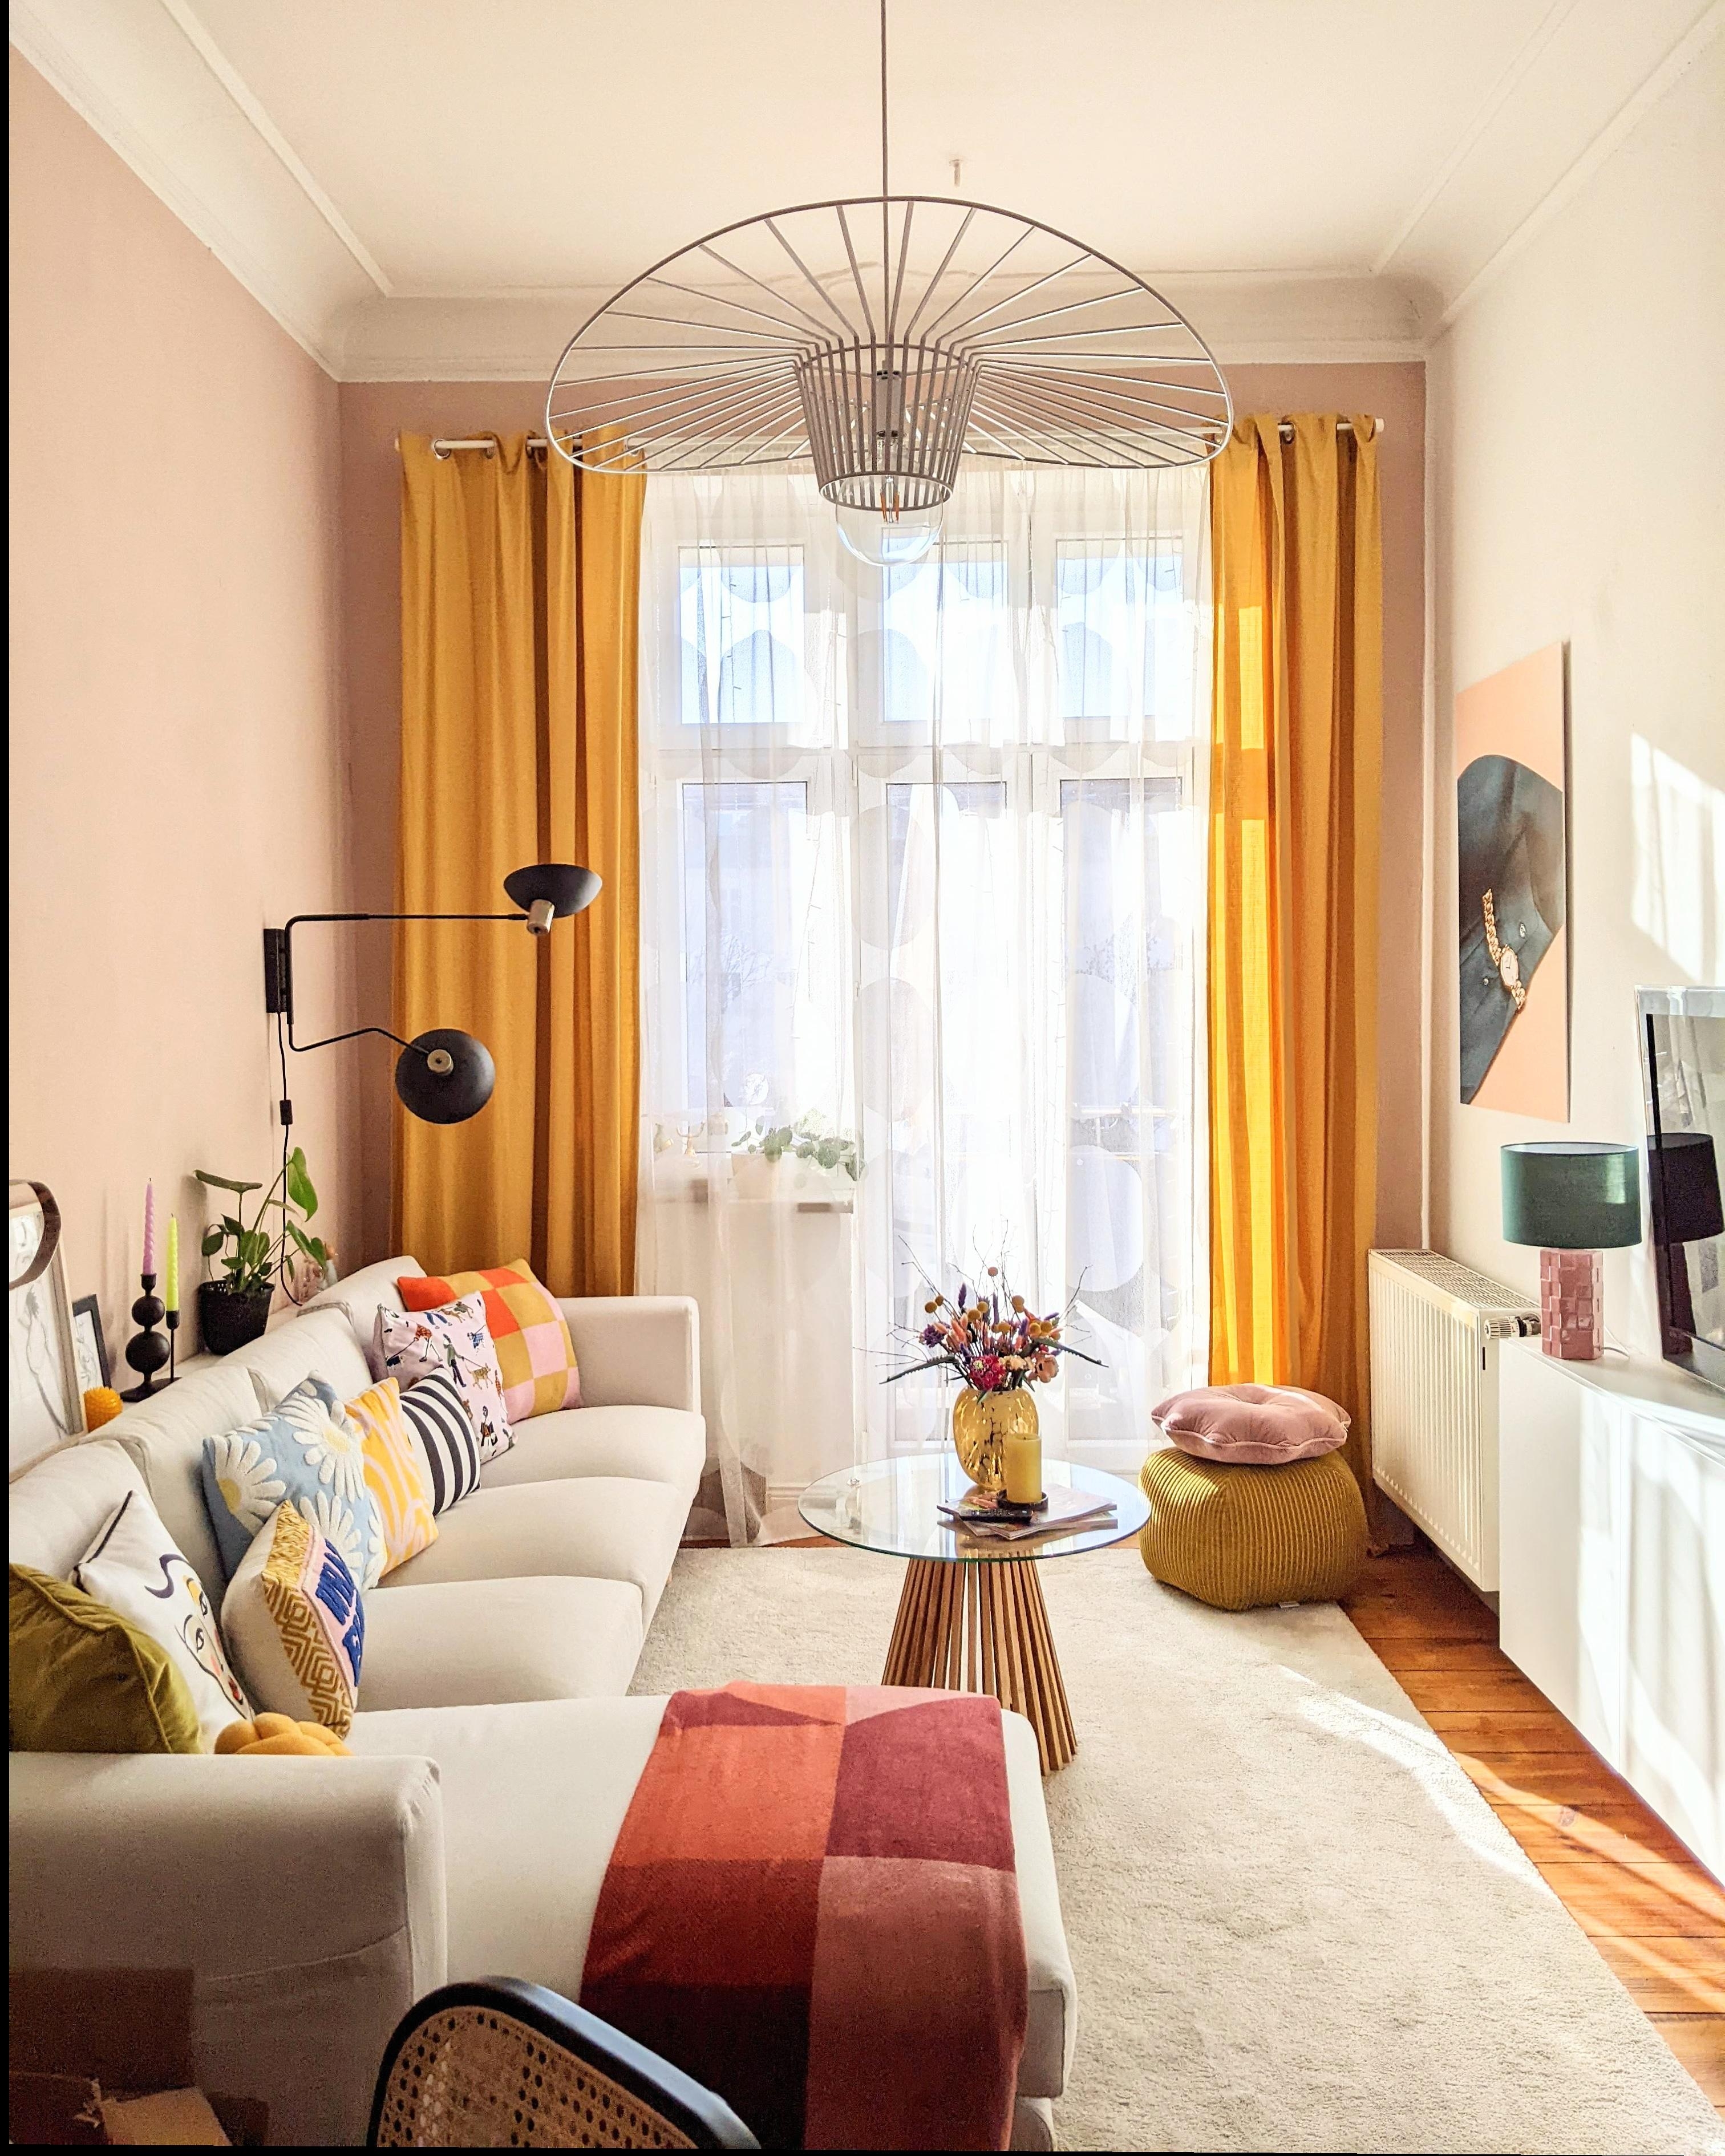 Sunshine is all I need. #couchliebt #sonne #colourfulinteriors #zuhause #couchstyle 